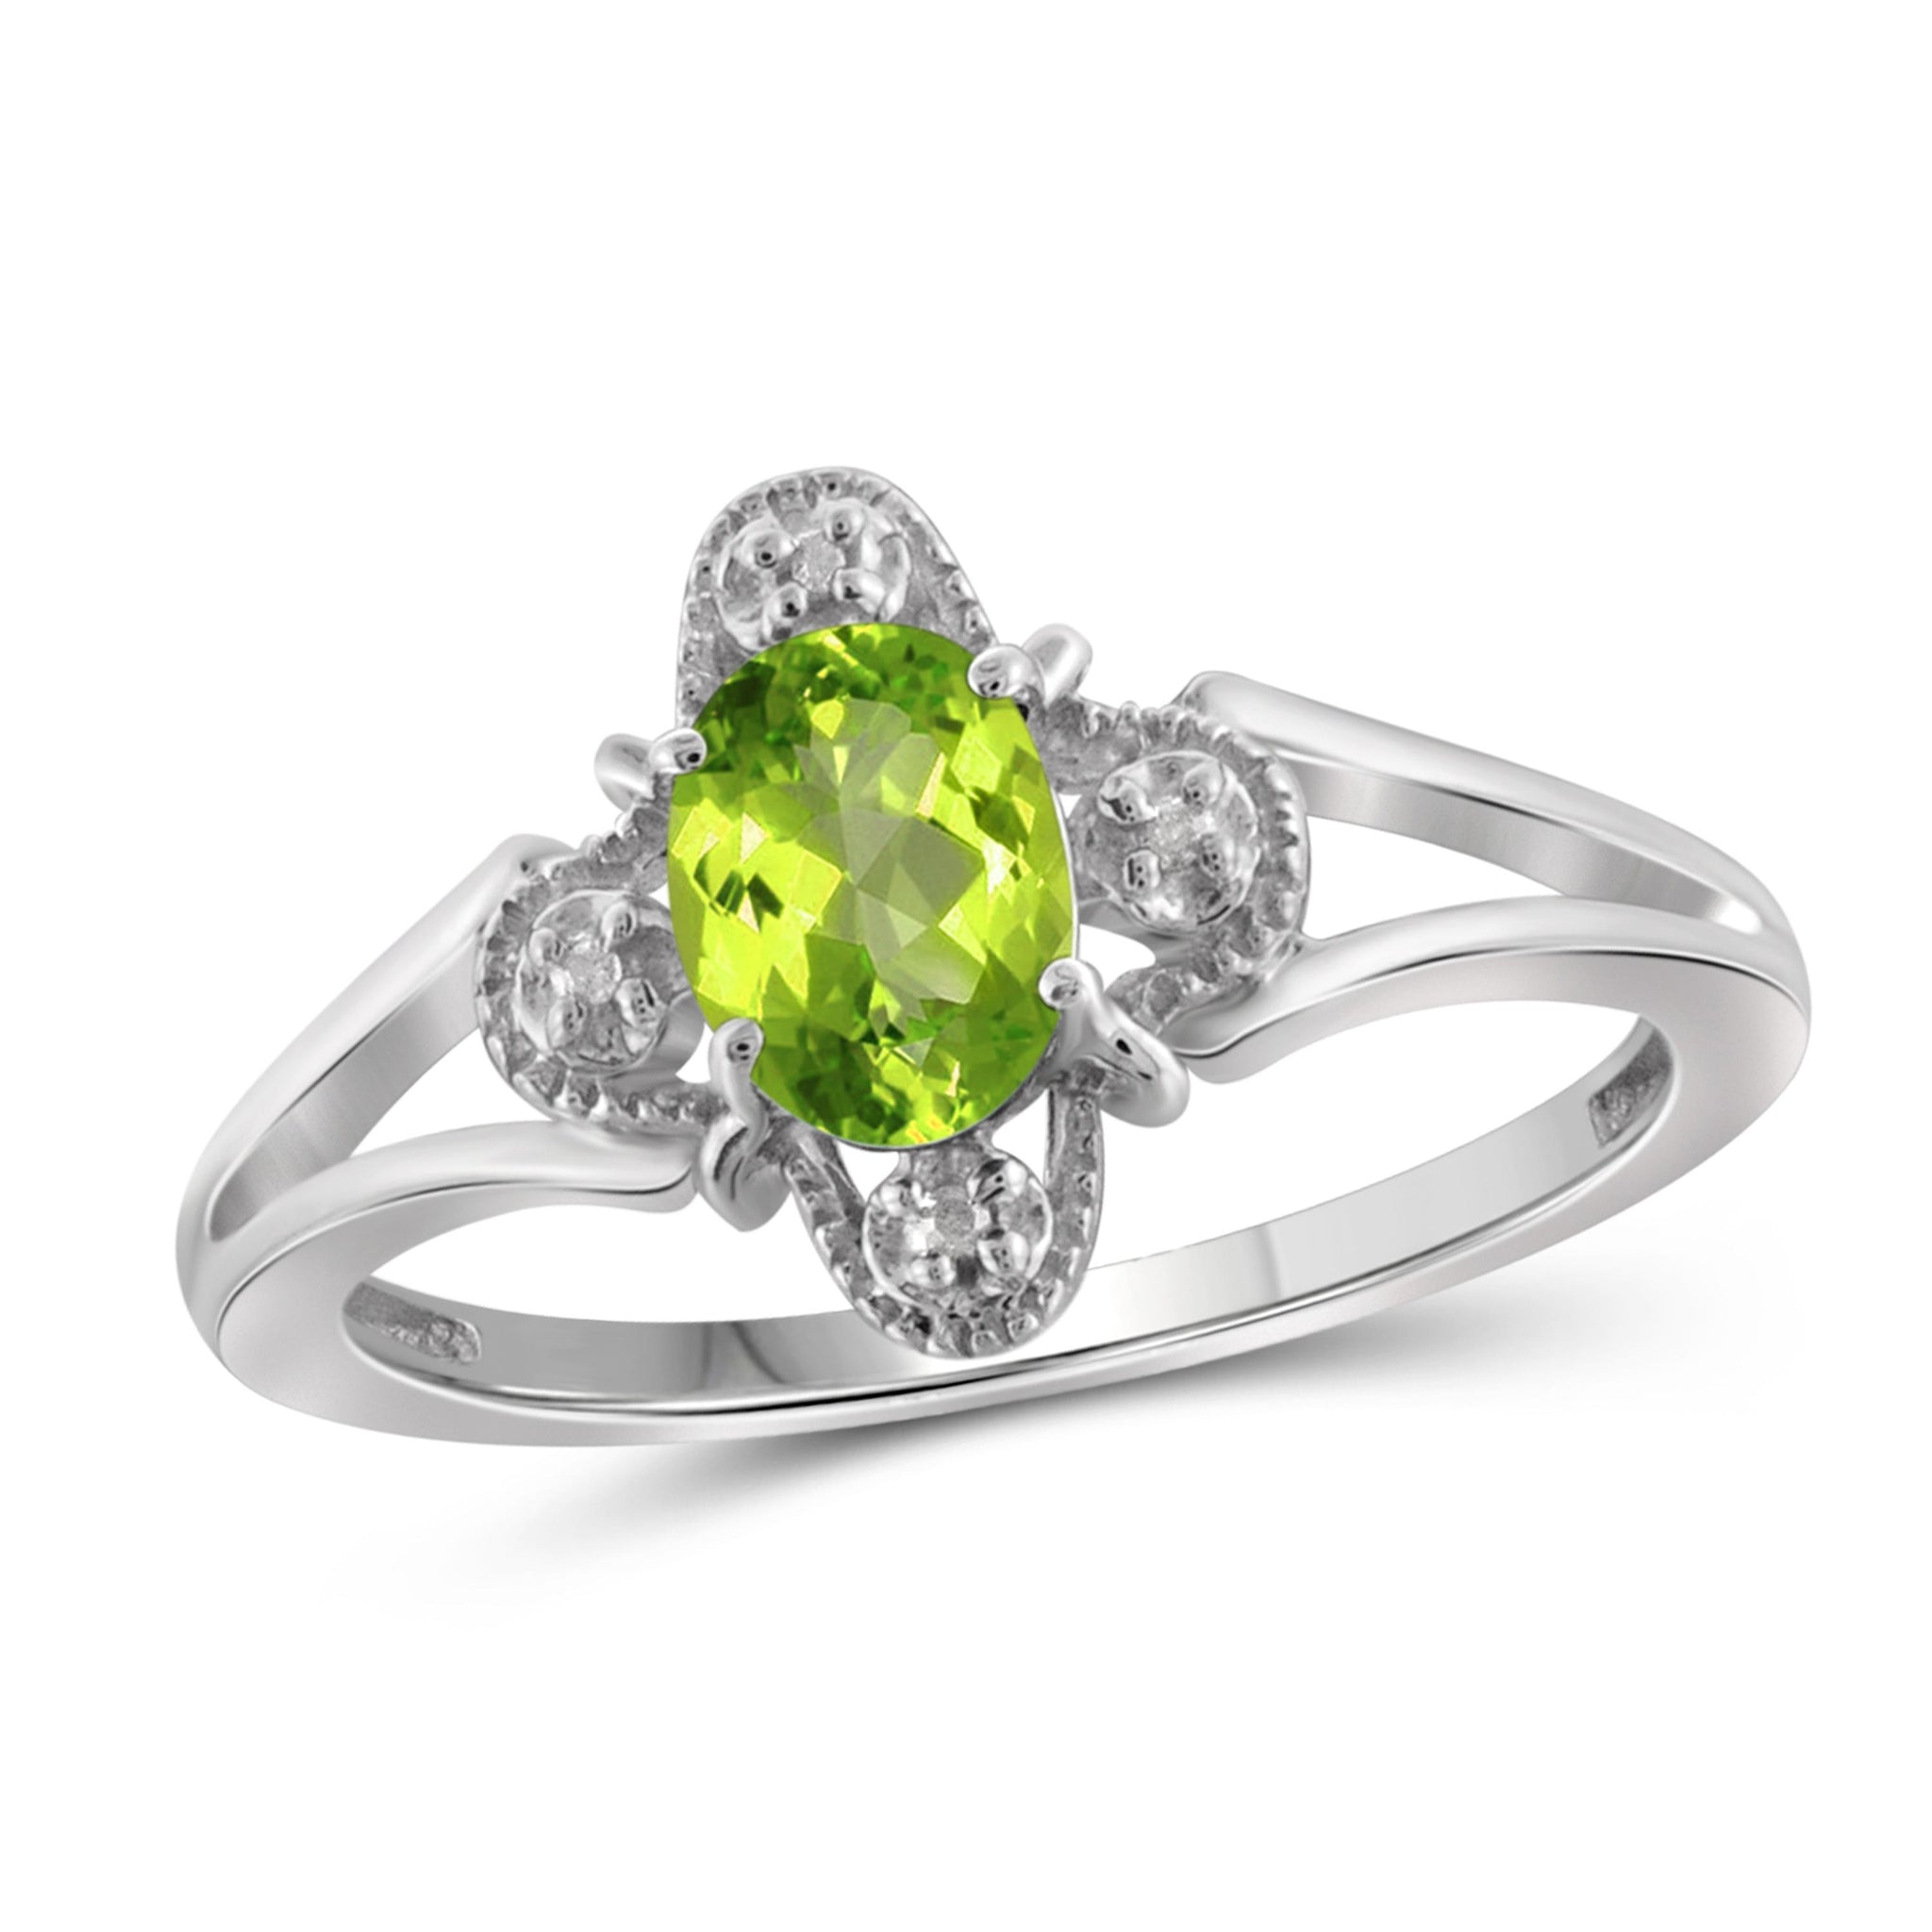 JewelonFire 3/4 Carat T.G.W. Peridot And White Diamond Accent Sterling Silver Ring - Assorted Colors